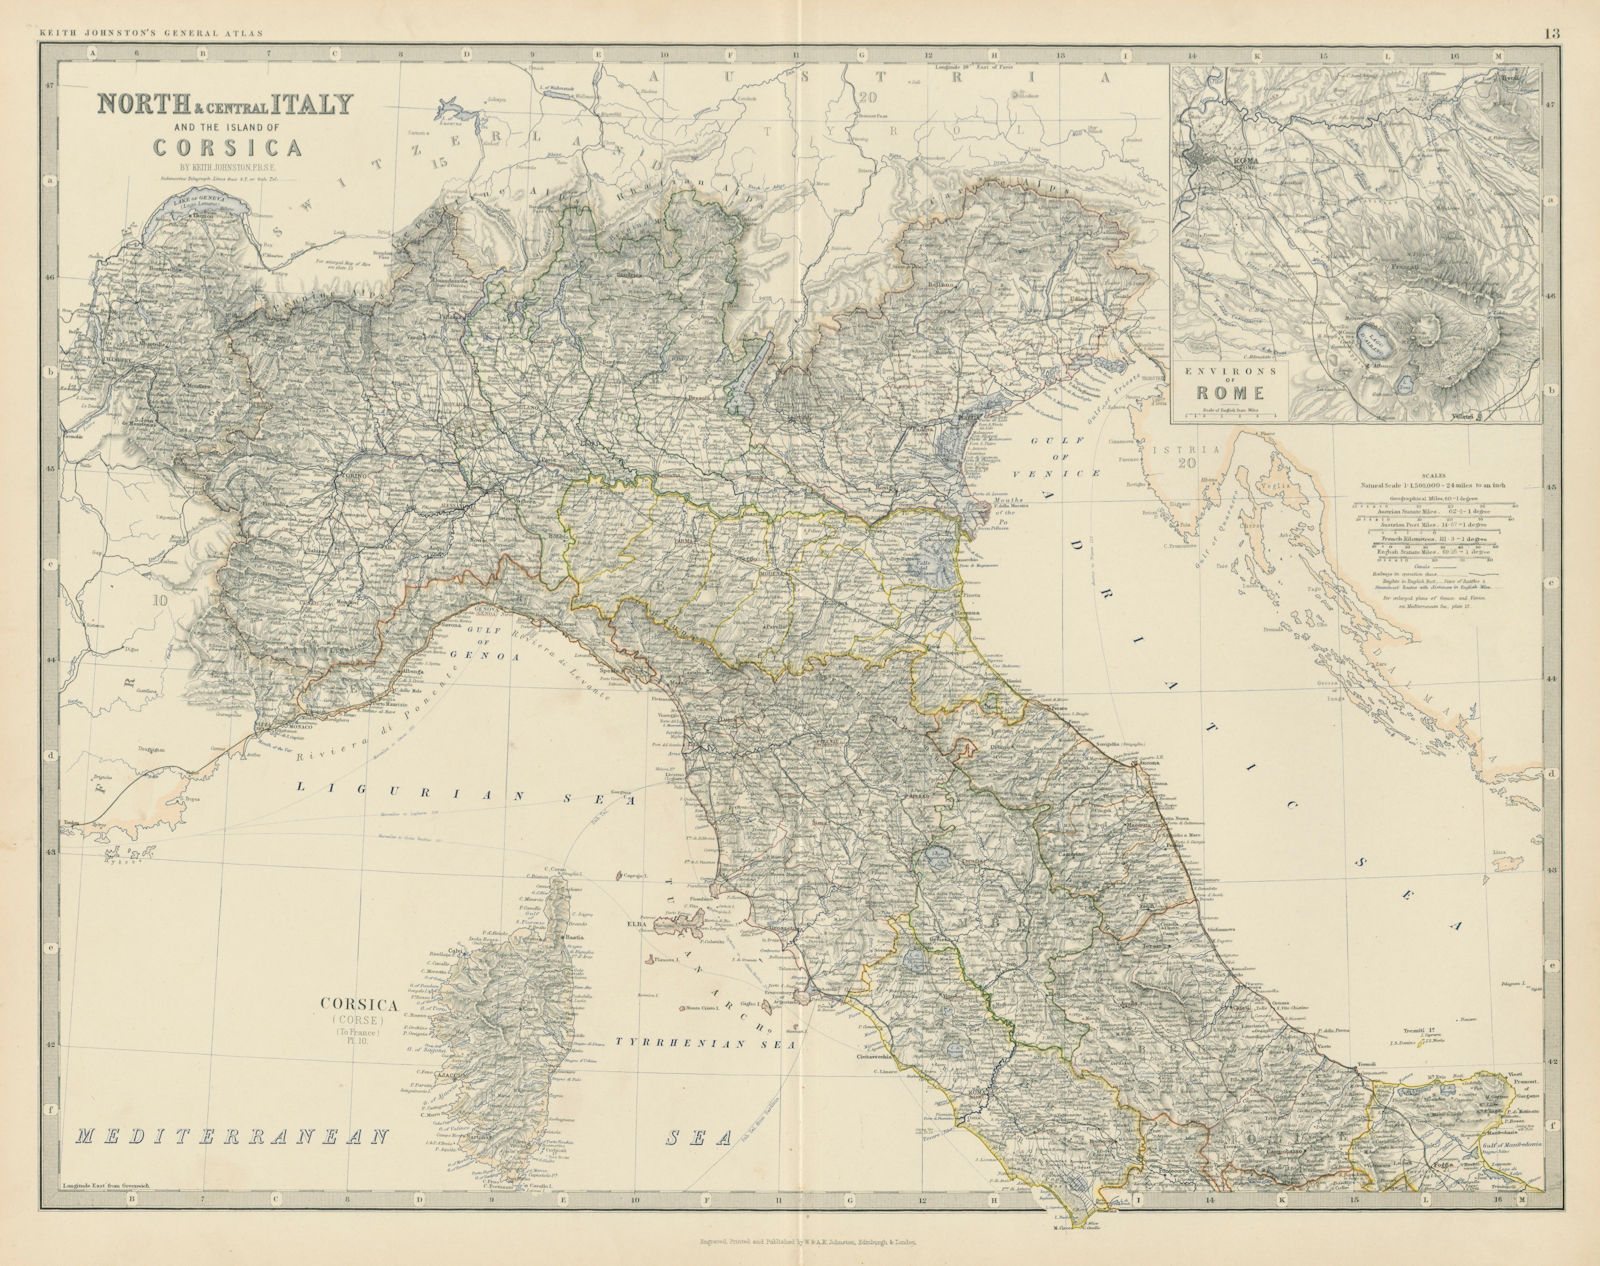 Associate Product North/Central Italy & Corsica. Savoie. Rome Environs. 50x60cm. JOHNSTON 1879 map